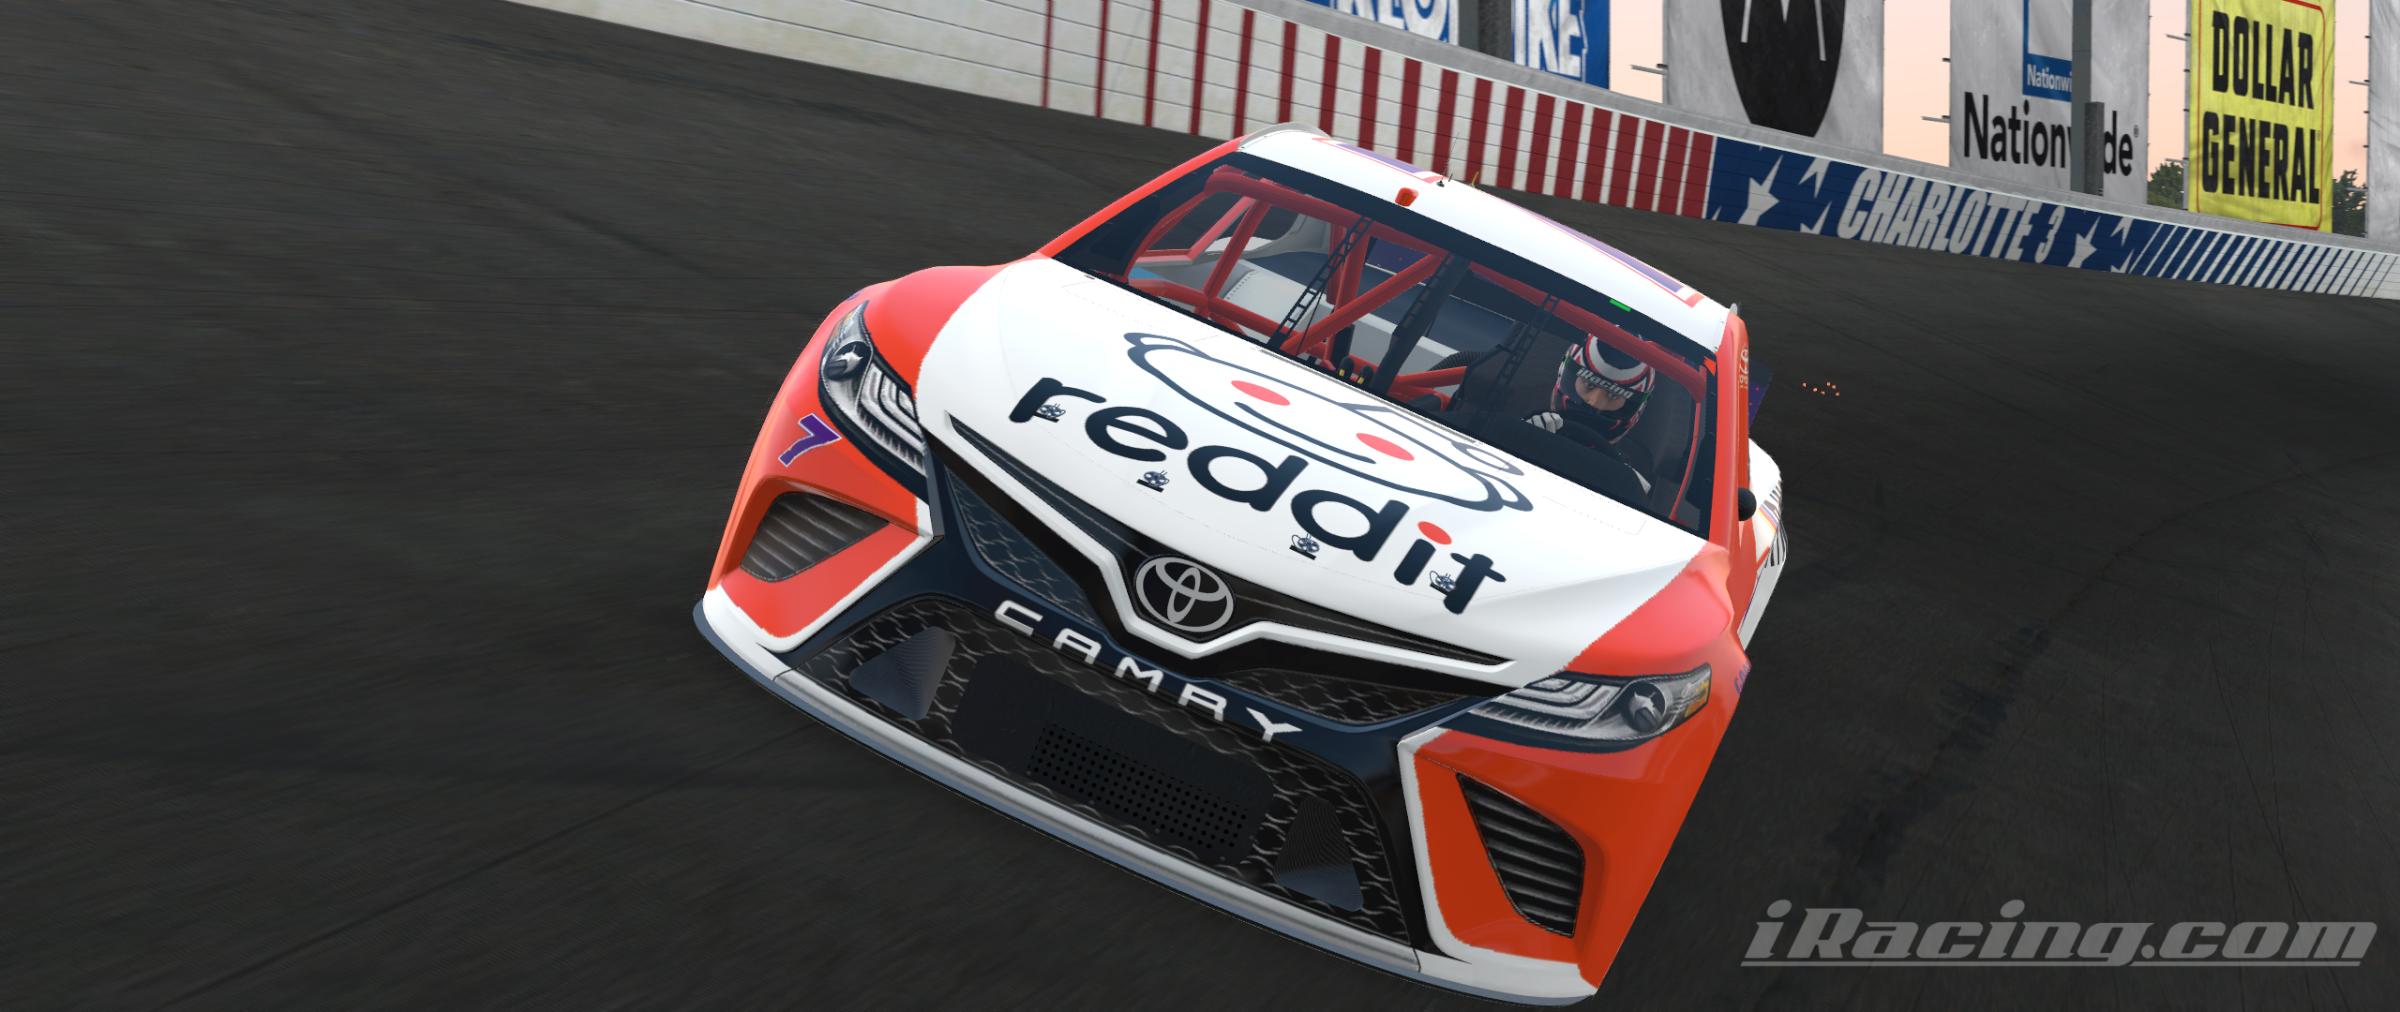 R Nascar Reddit Camry By Jason F Trading Paints